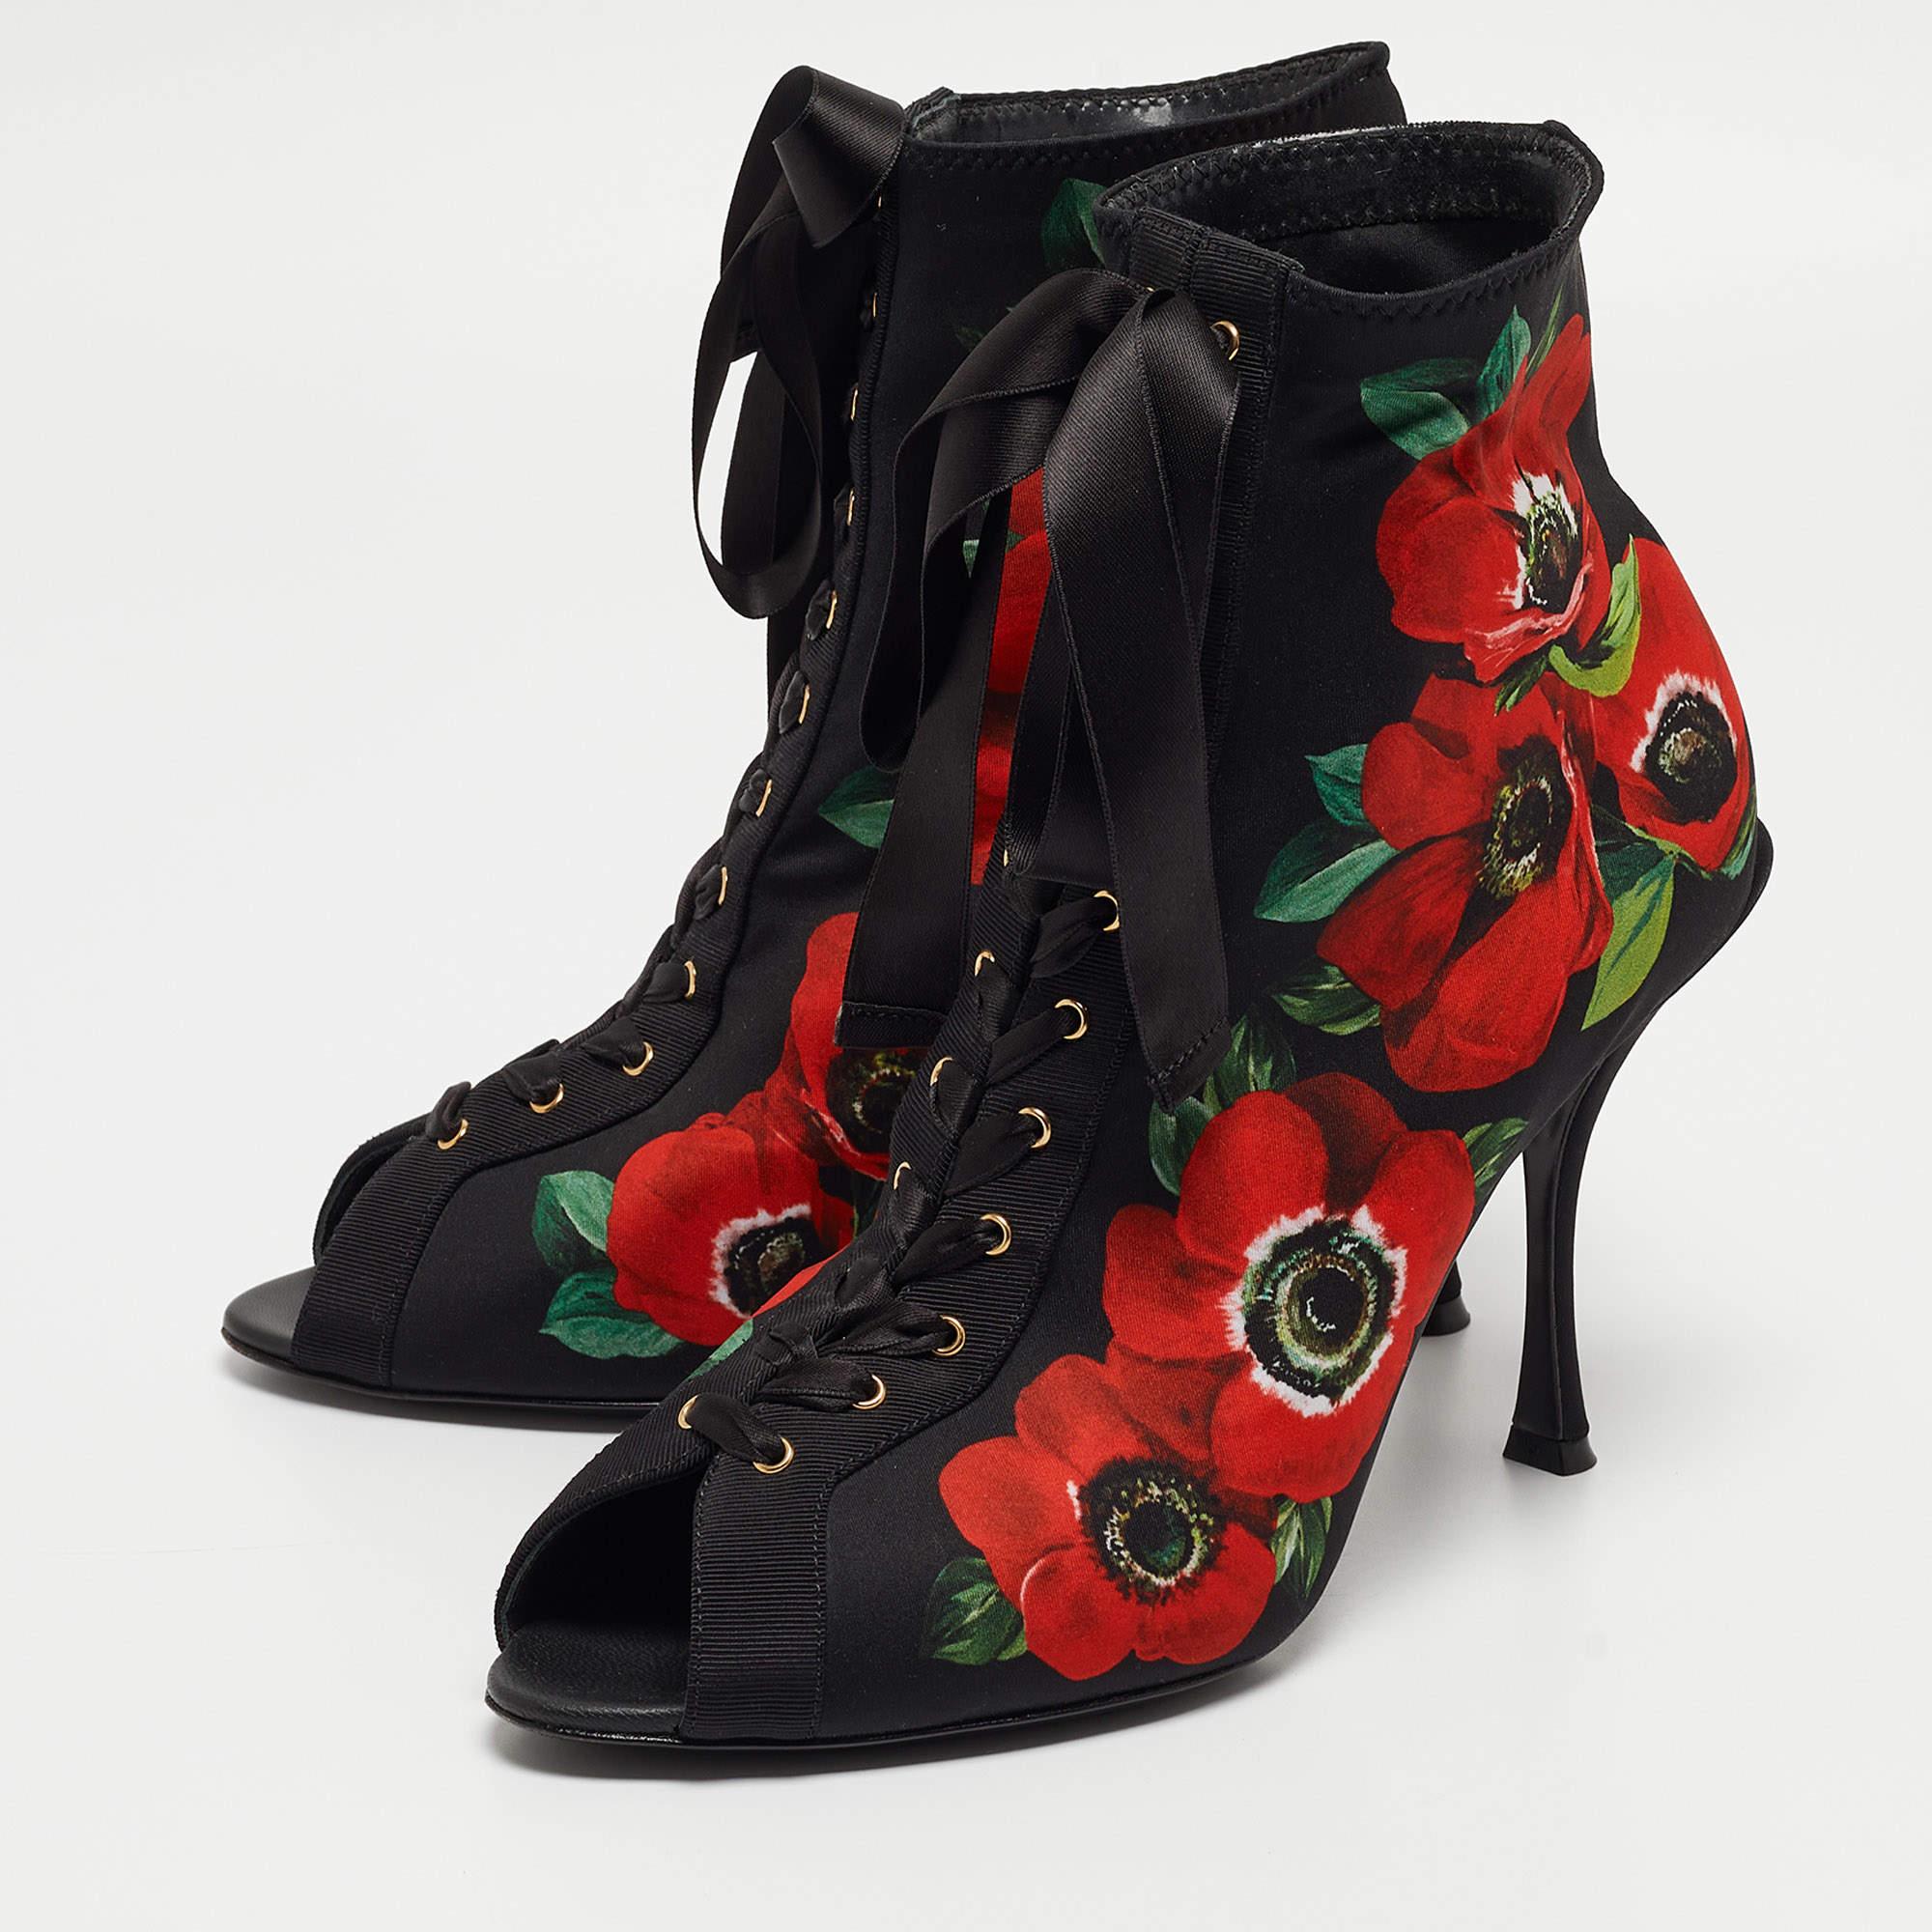 Meticulously designed into a smart silhouette, these Dolce & Gabbana booties are on-point with style. They come with comfortable insoles and durable outsoles to last you forever. These boots are beautified with floral print for an alluring